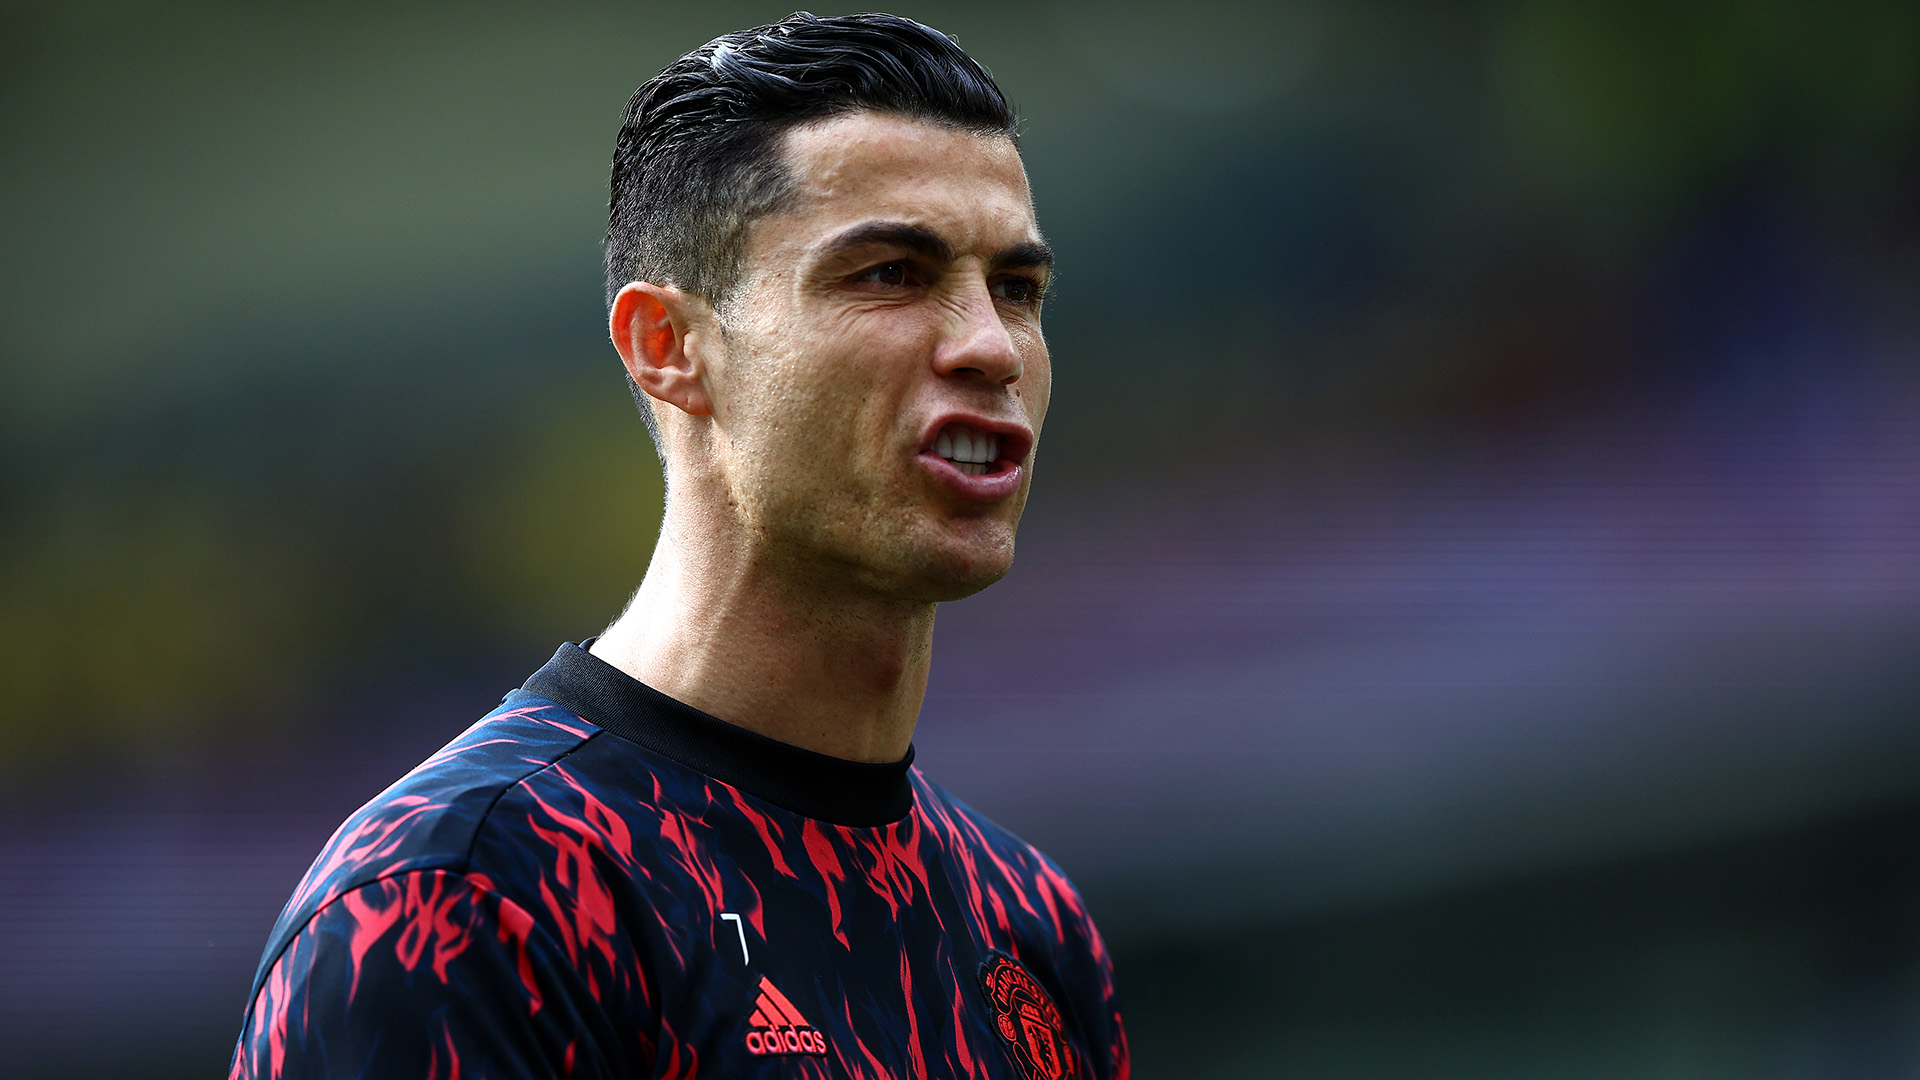 1920x1080 Did Barcelona sign Lewandowski over Ronaldo? Laporta reveals the 'truth' as Man Utd striker searches for way out | India